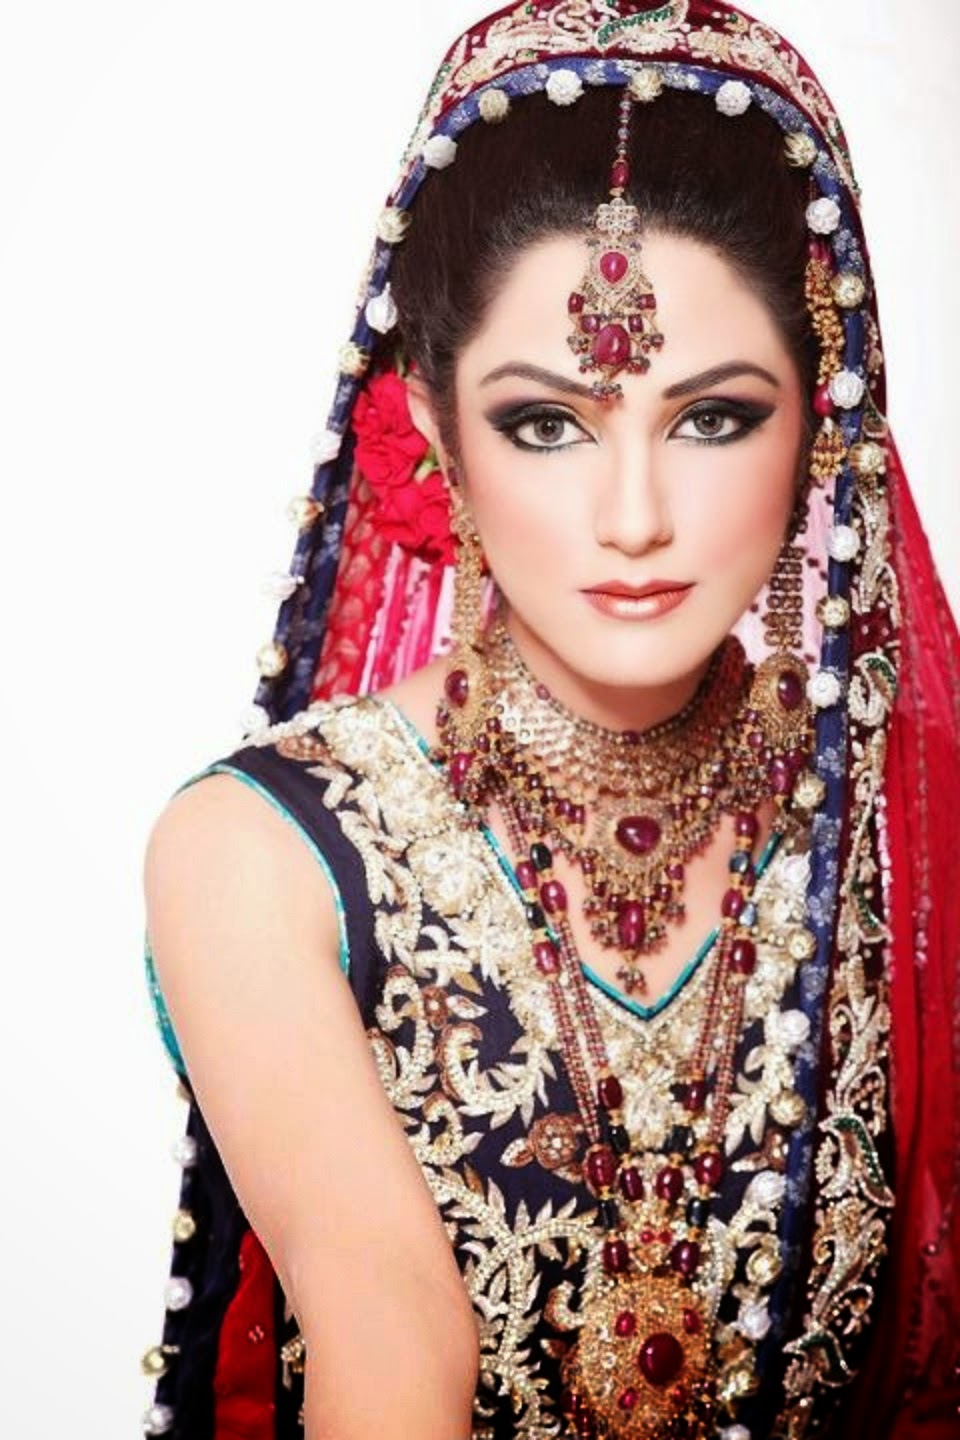 New Latest Wedding Jewelry & Make up Wallpapers Free Download